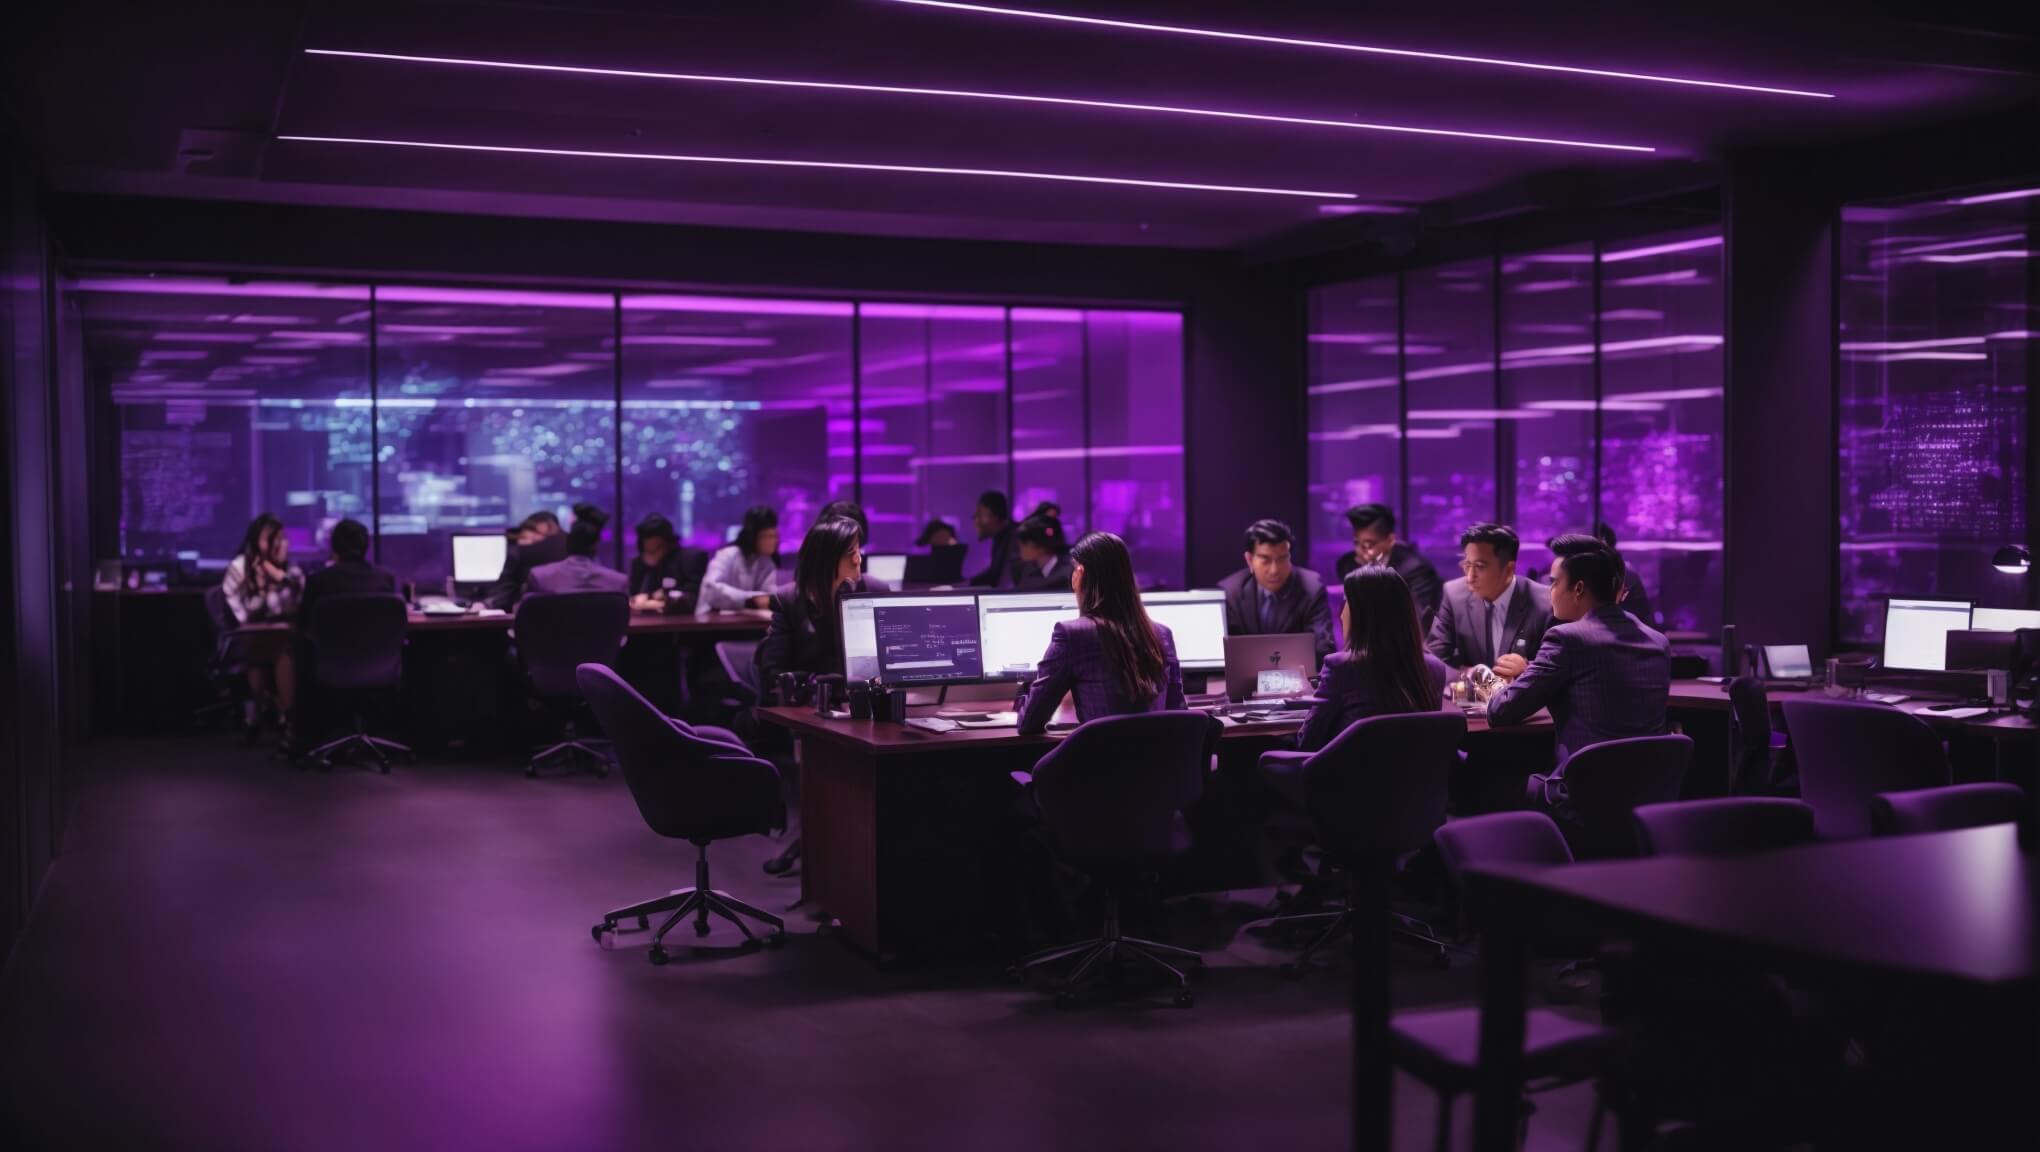 PhotoReal_an_dark_office_room_with_purple_lights_colors_graphi_1 (1) (1)